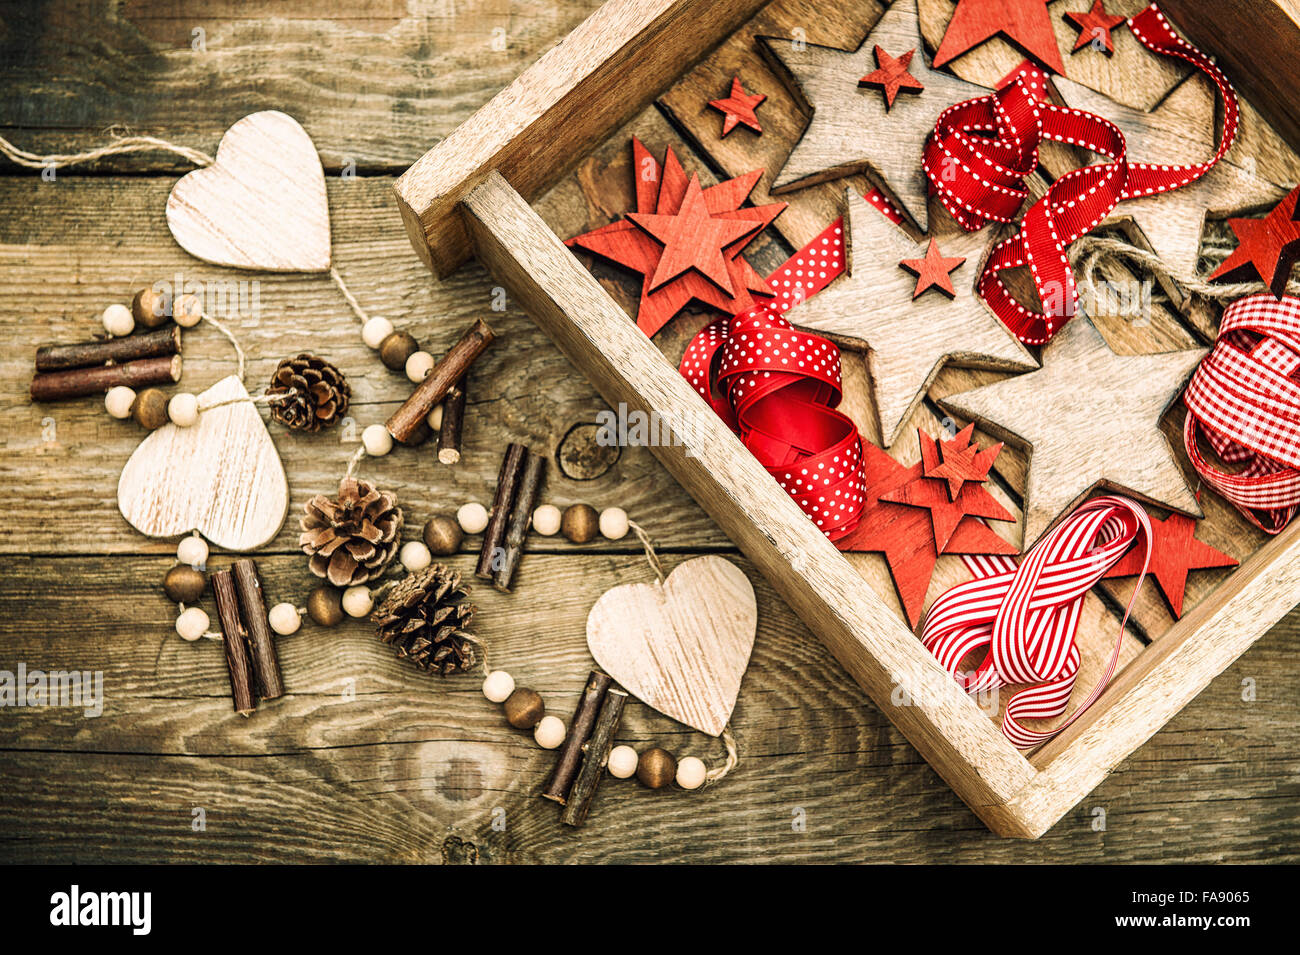 Christmas decorations wooden stars and red ribbons. Nostalgic retro style dark toned picture Stock Photo